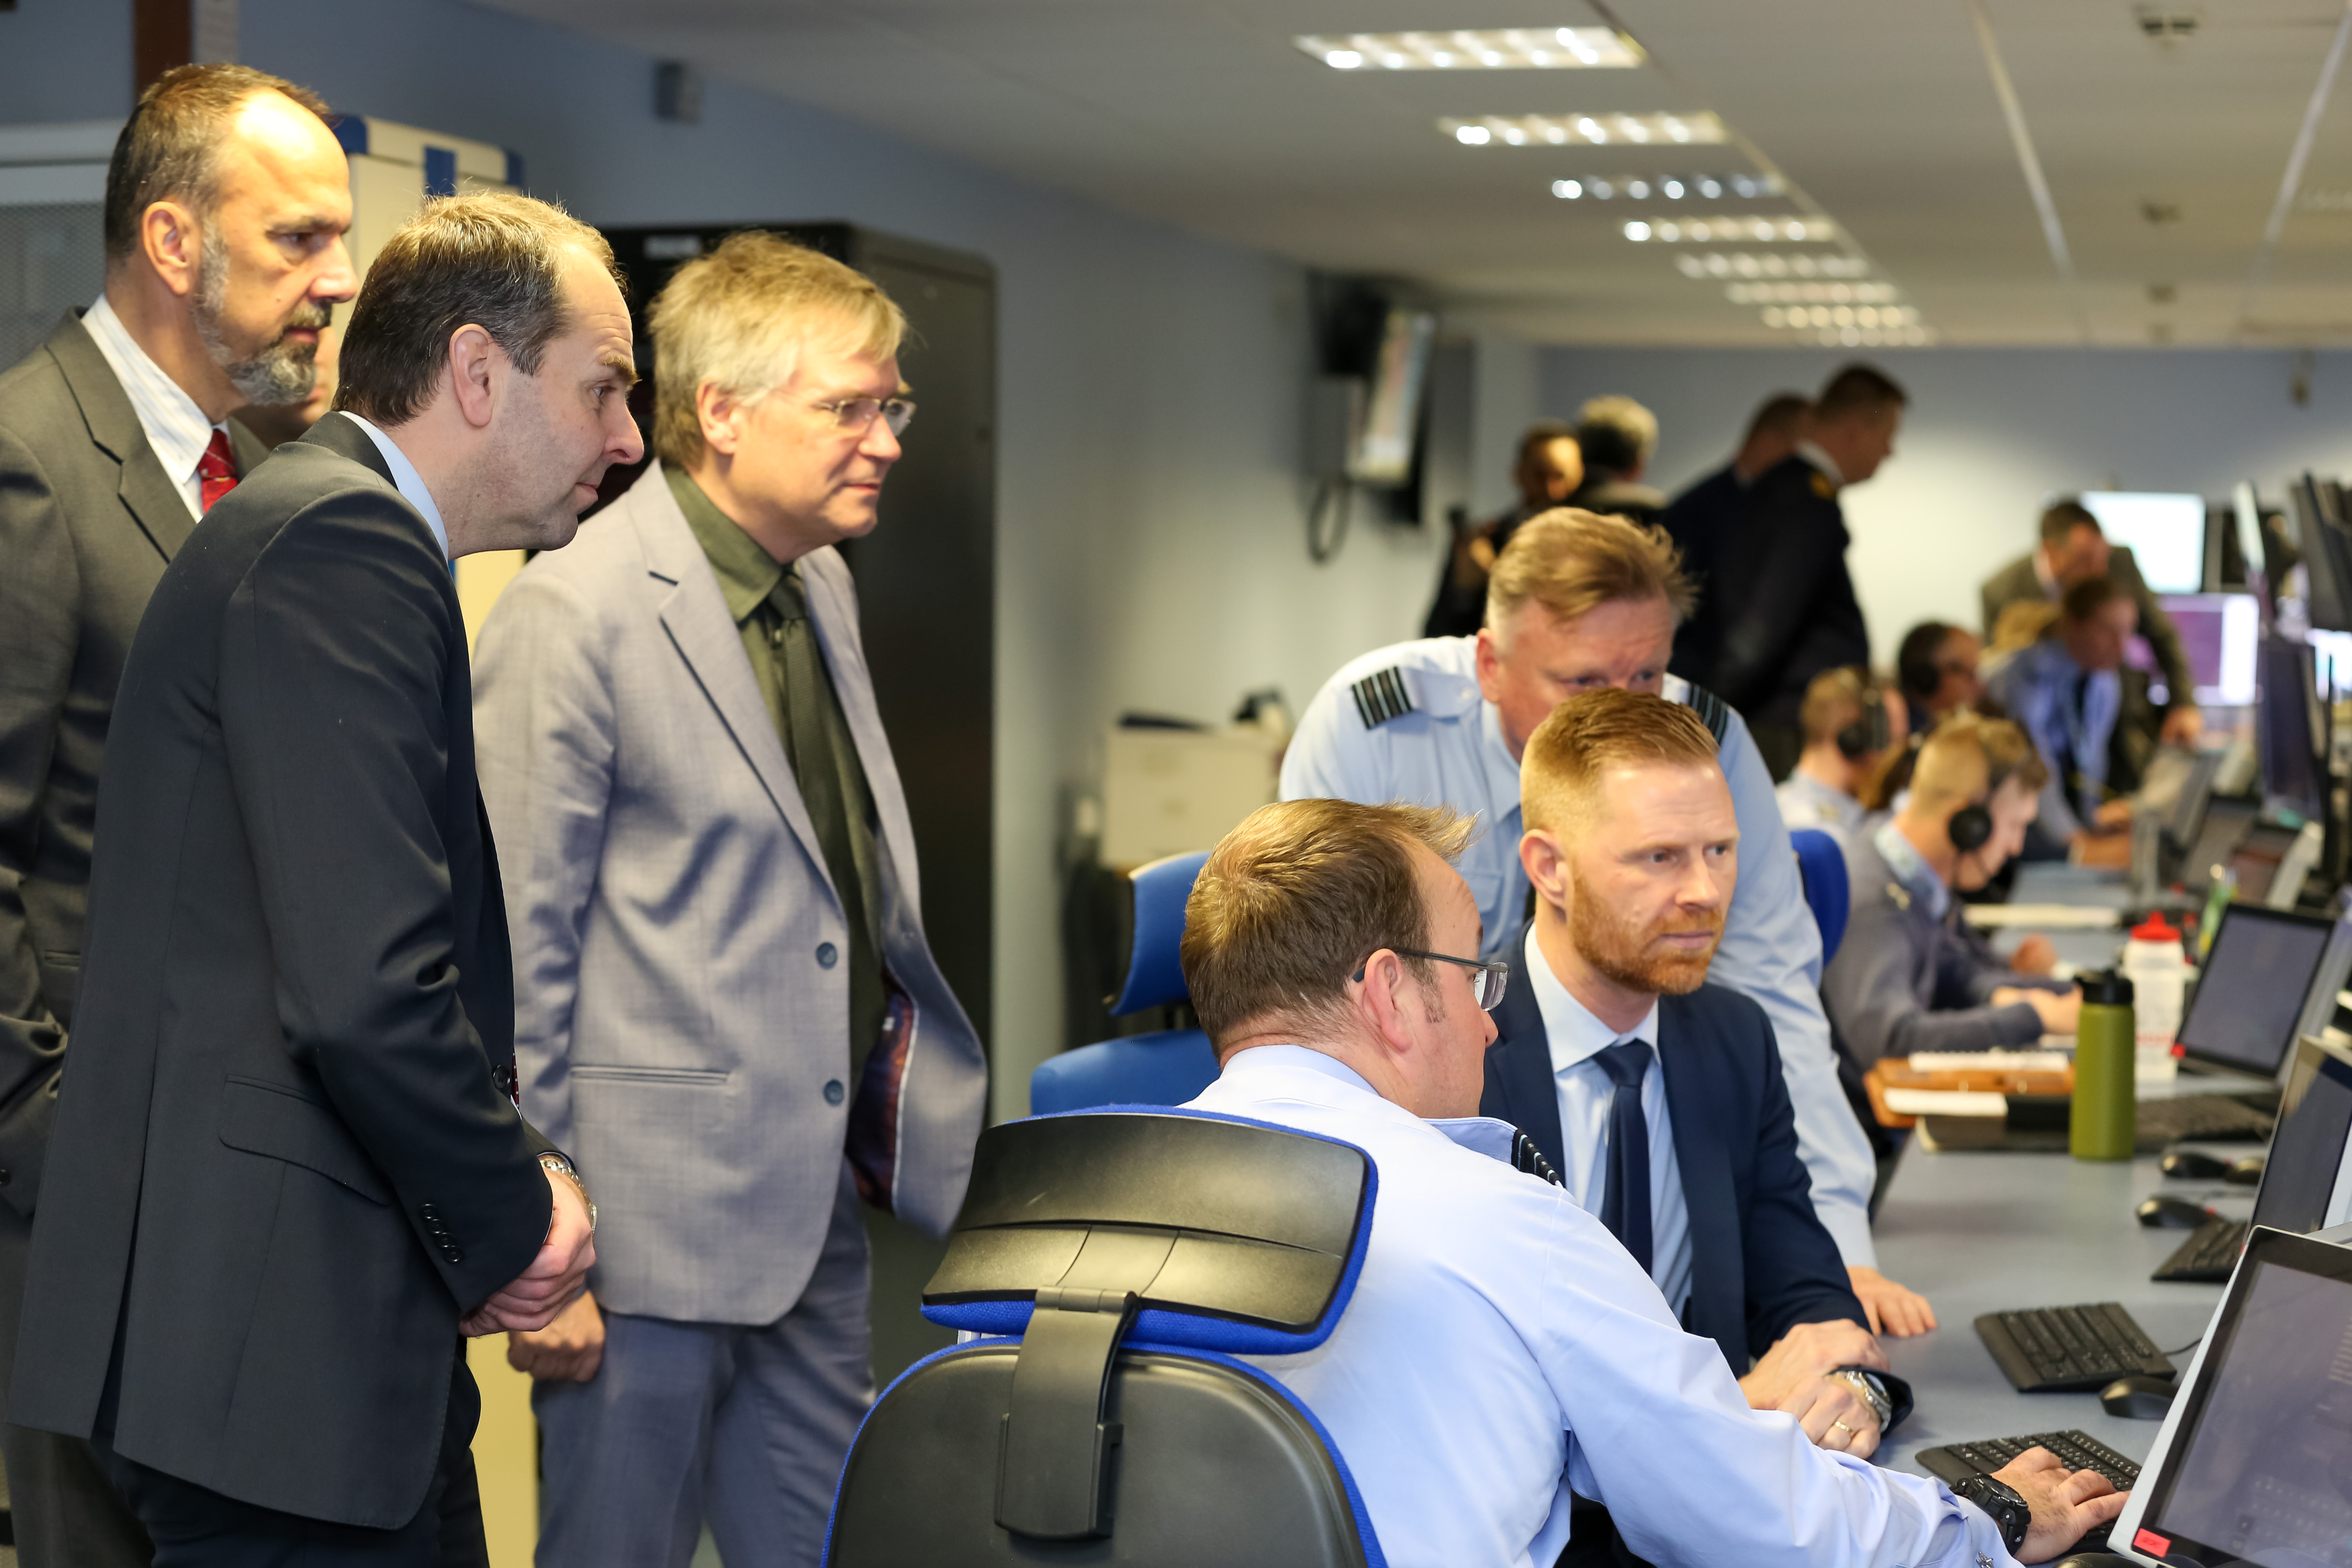 Image shows RAF aviators and civilians standing with discussion with others sitting at computer desk.